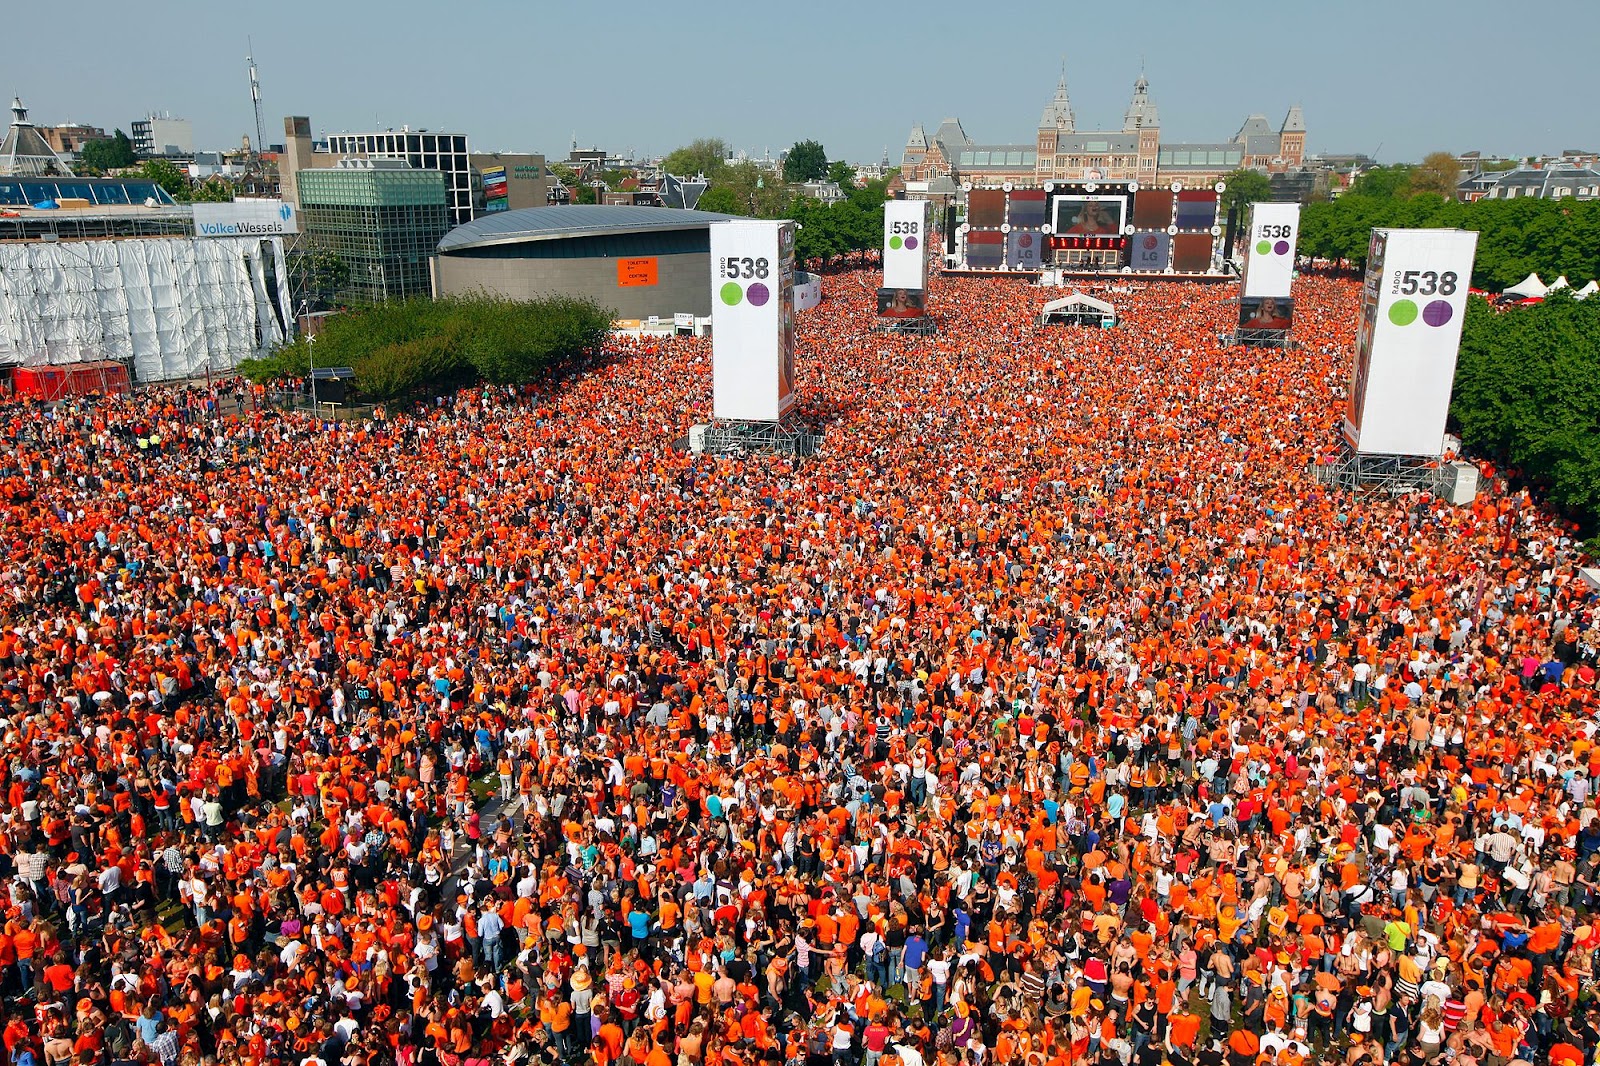 Queen’s Day in Holland: where are you celebrating? | Meet Mr. Holland Blog